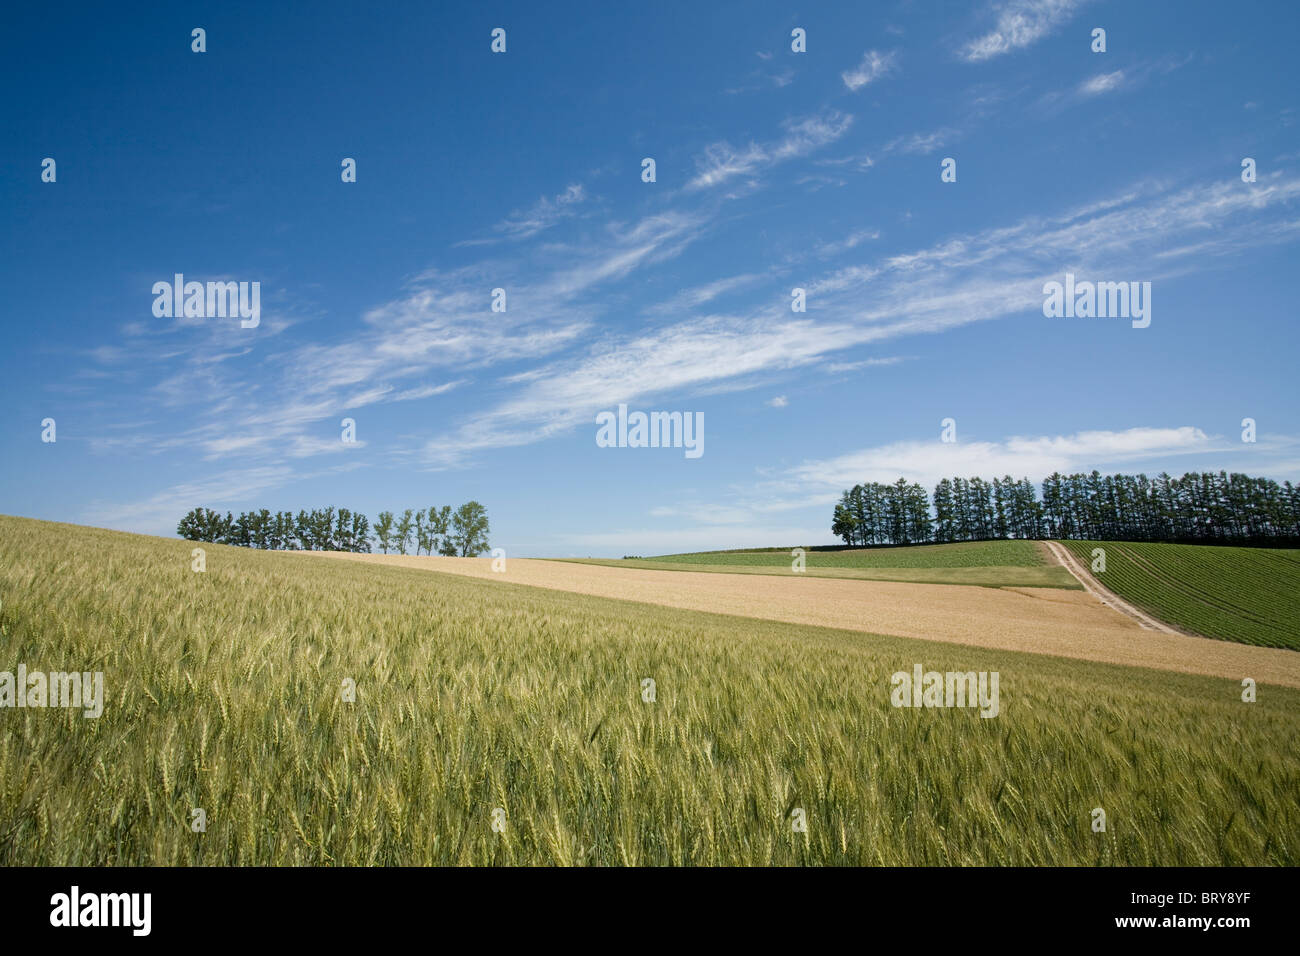 Wheat field and trees in a row Hokkaido Prefecture Japan Stock Photo